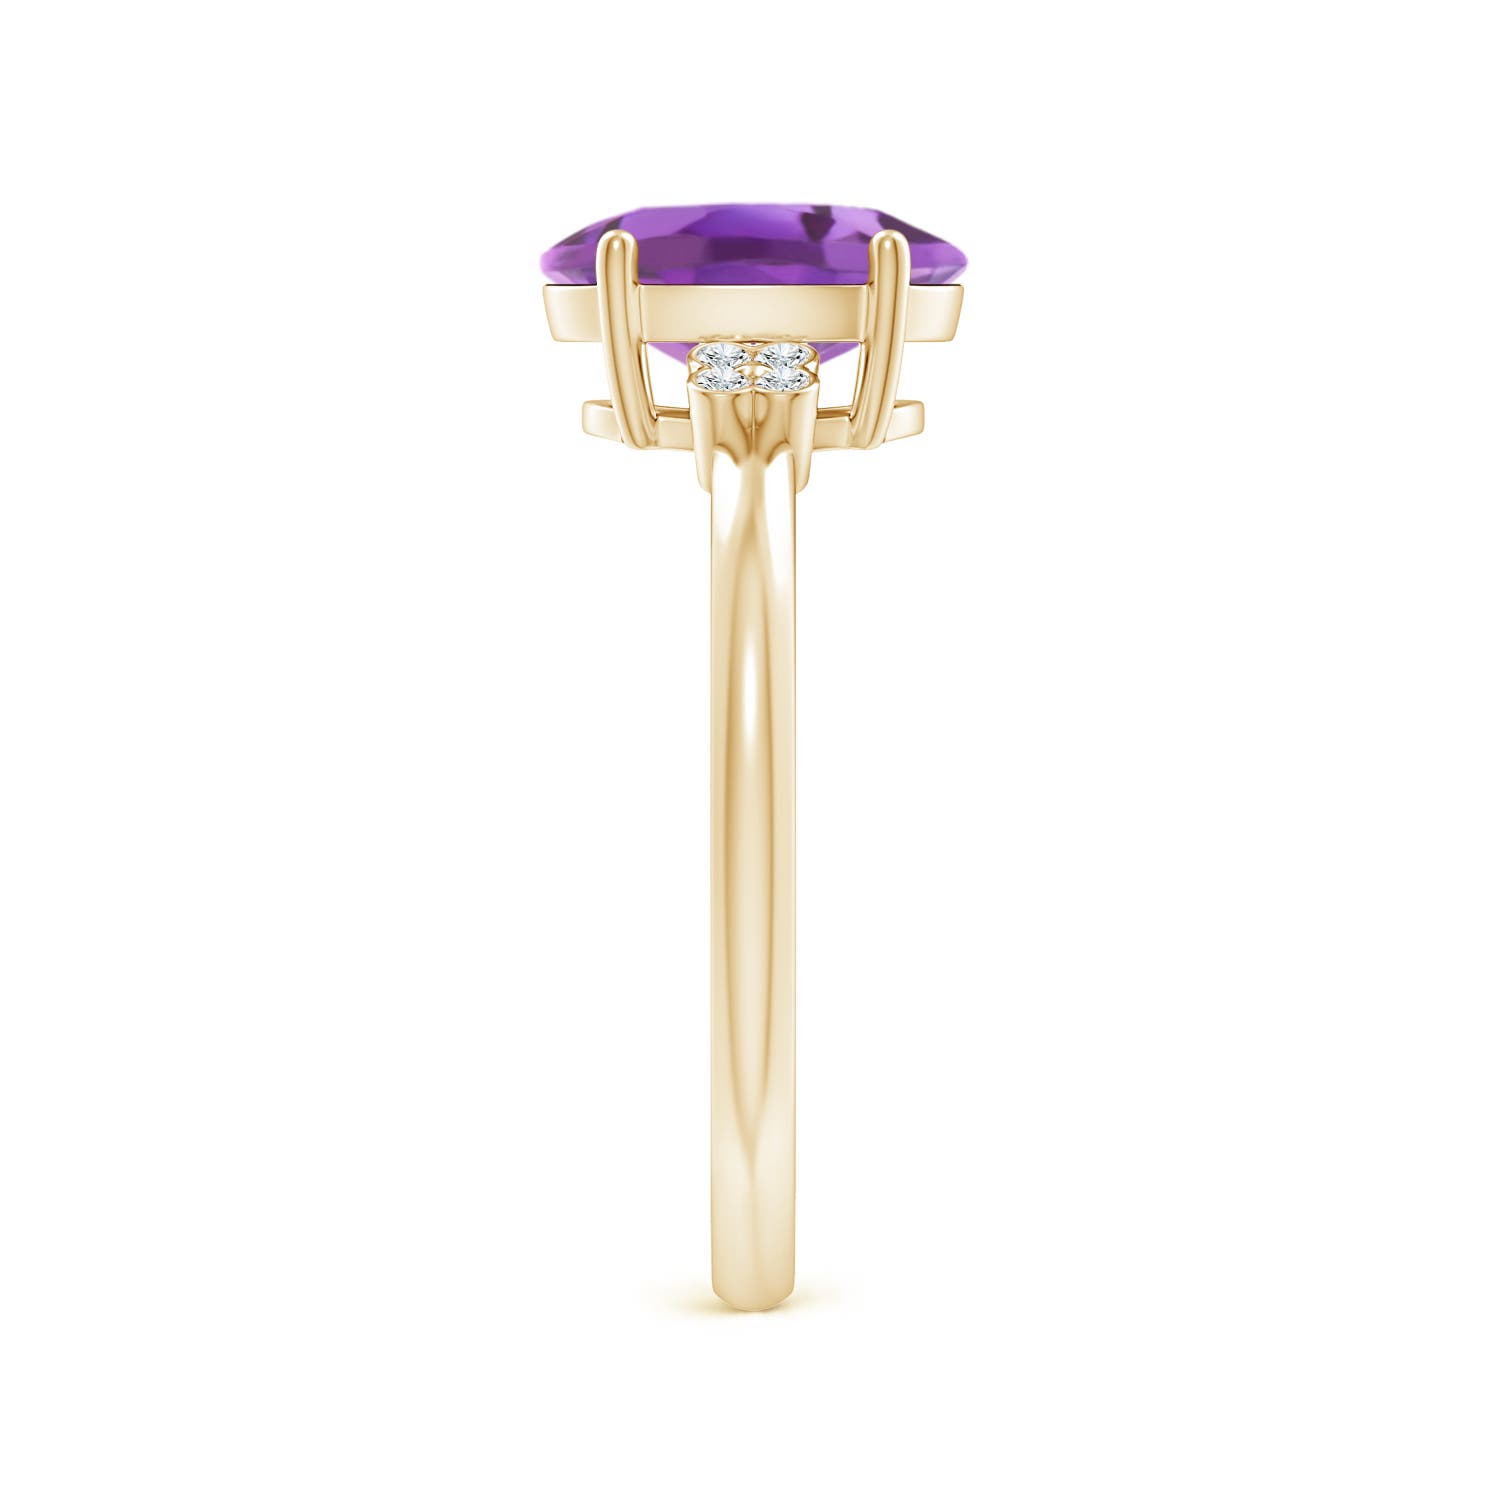 A - Amethyst / 1.66 CT / 14 KT Yellow Gold